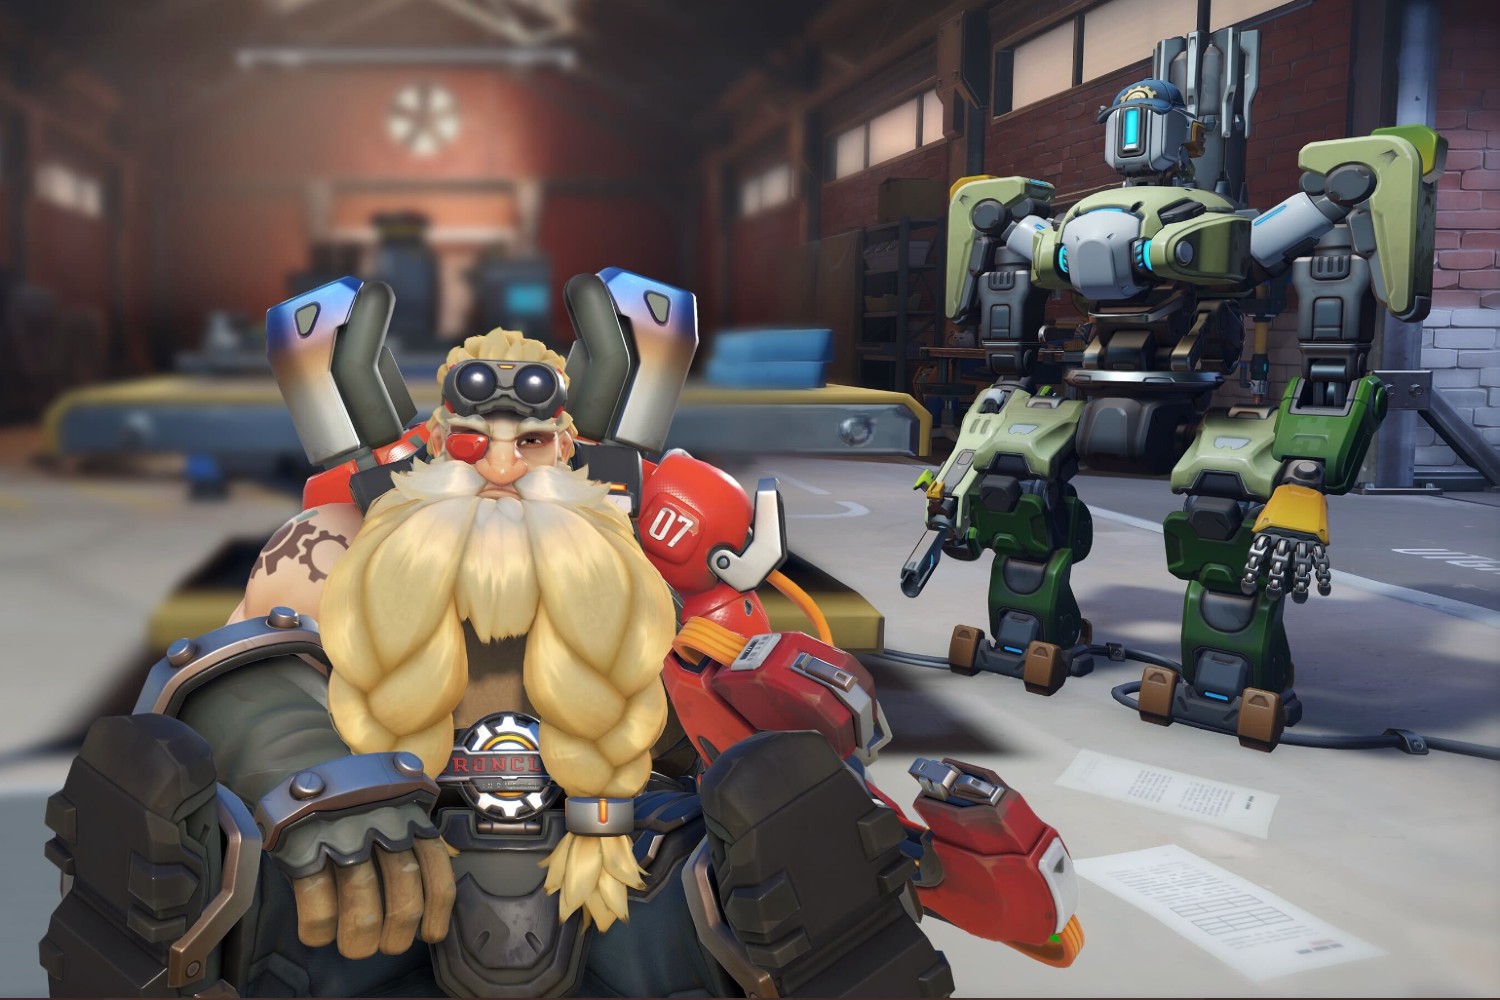 Bastion and Torbjorn sitting in the workshop in Overwatch 2.